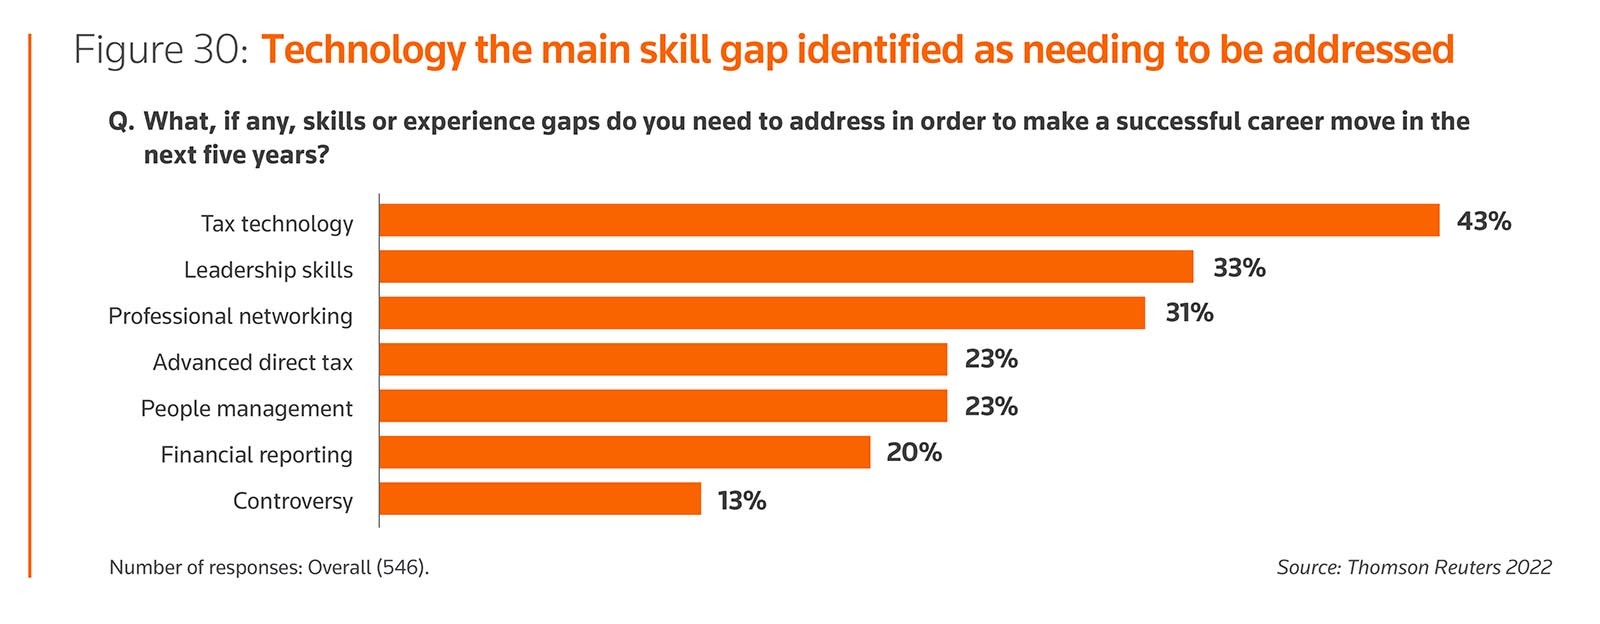 Figure 30: Technology the main skill gap identified as needing to be addressed